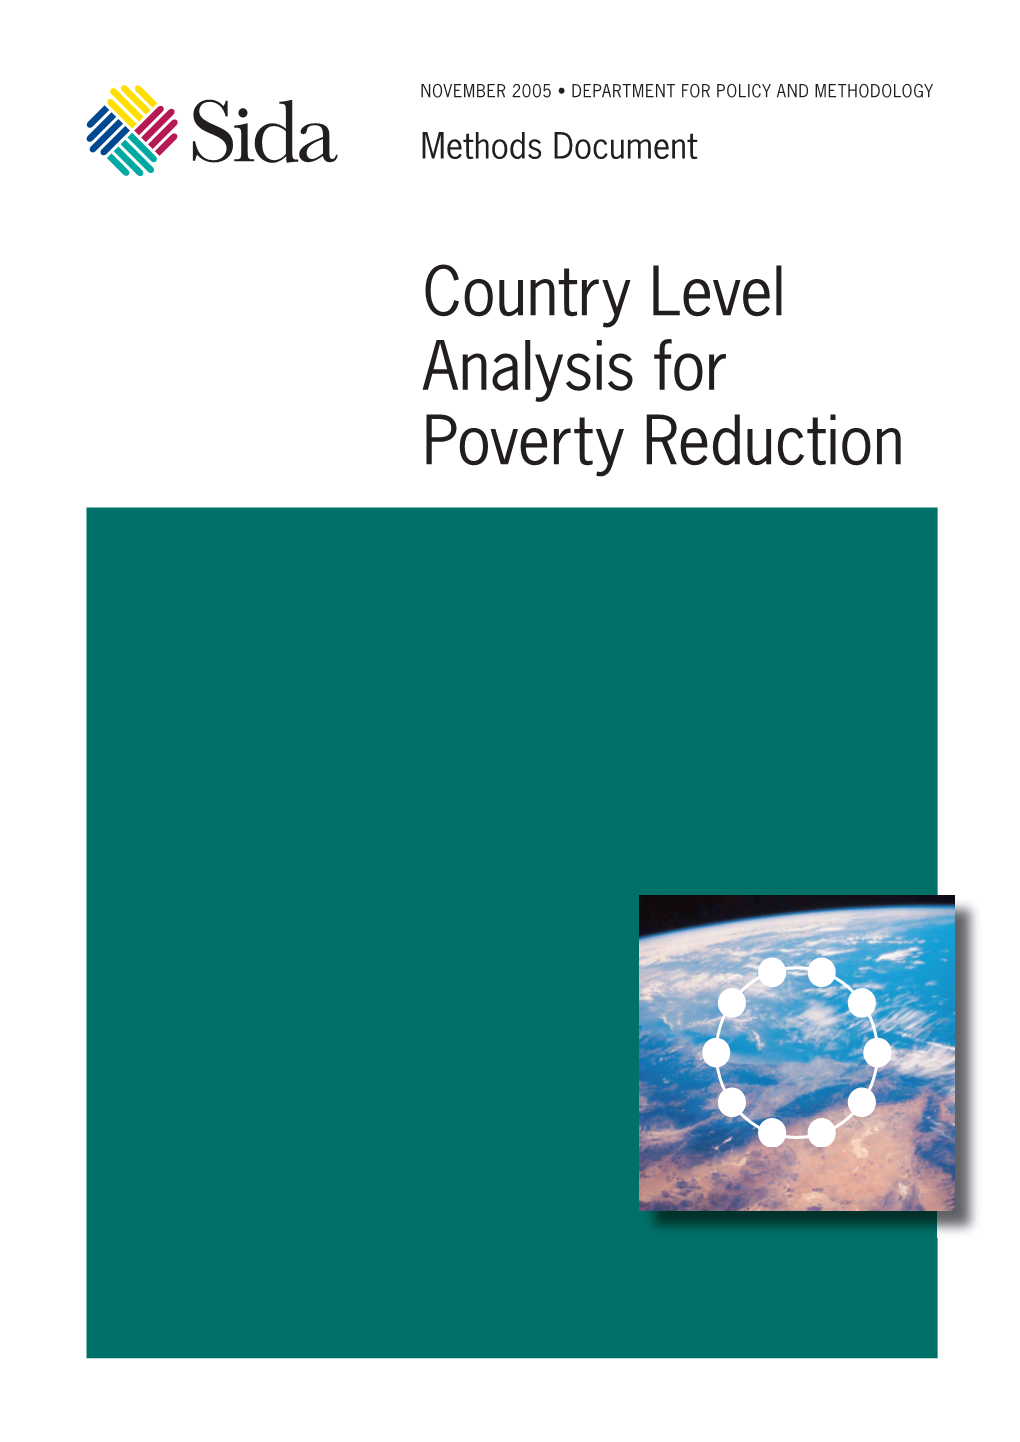 Country Level Analysis for Poverty Reduction